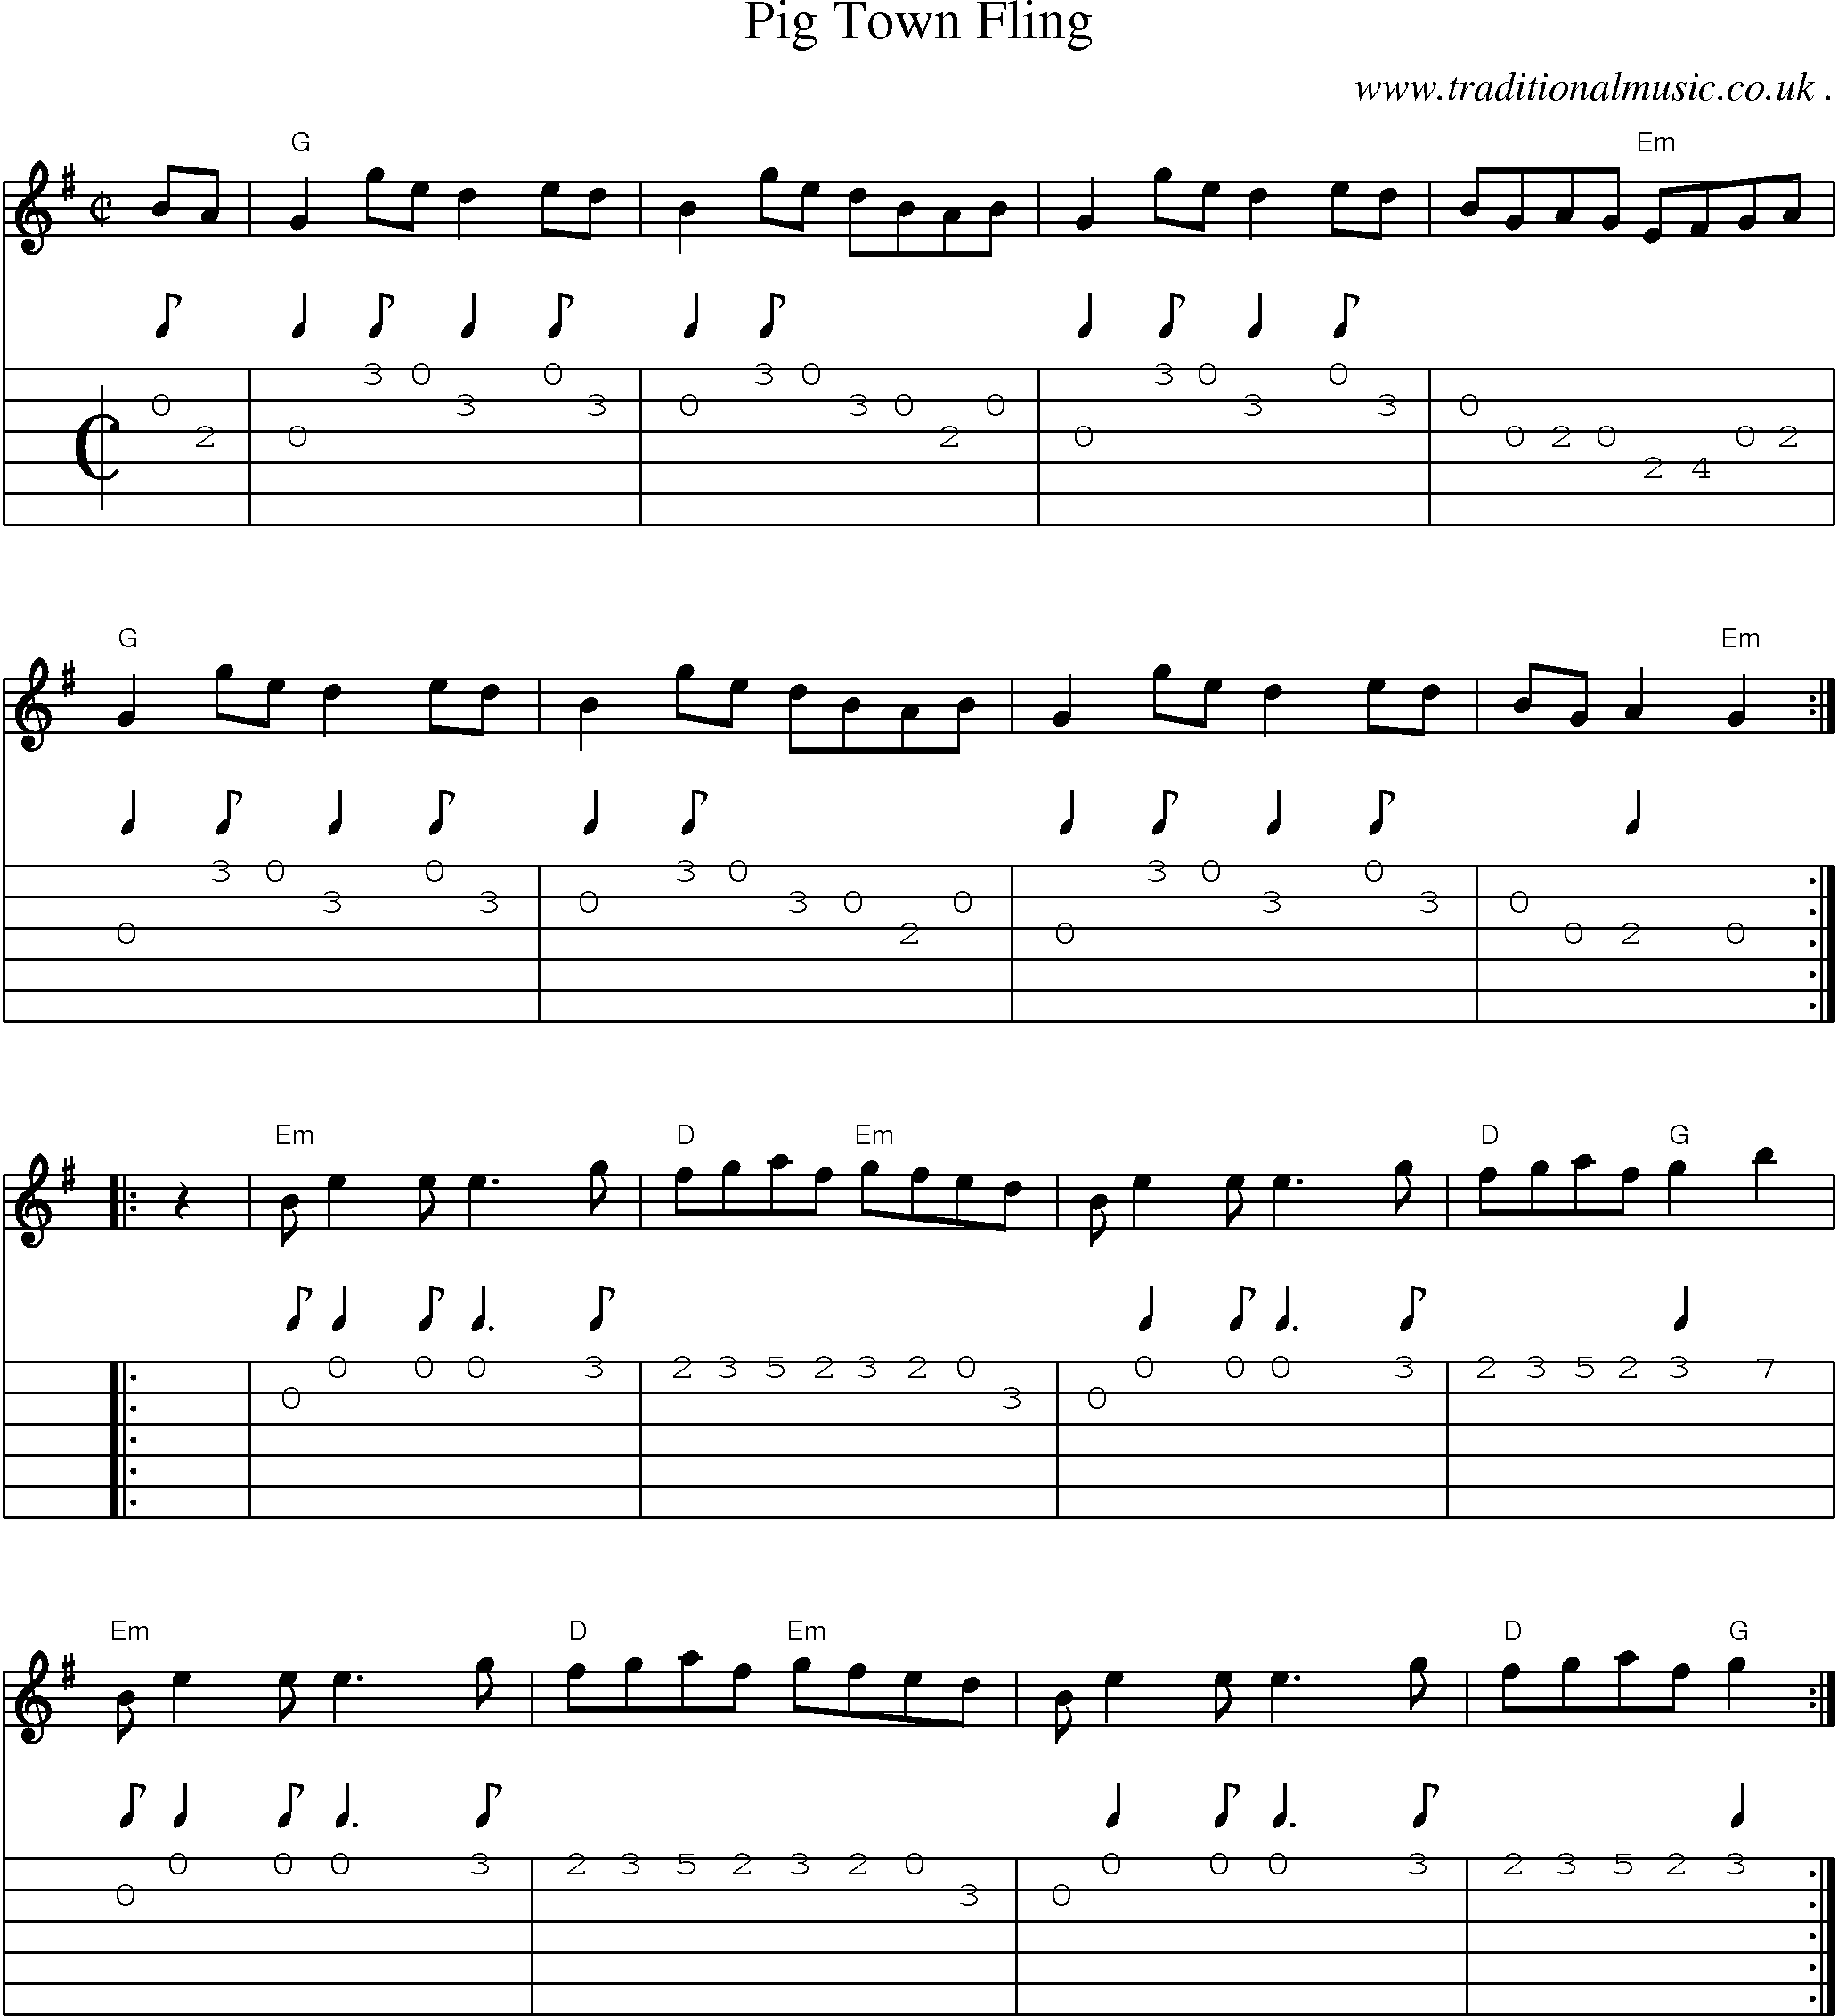 Music Score and Guitar Tabs for Pig Town Fling